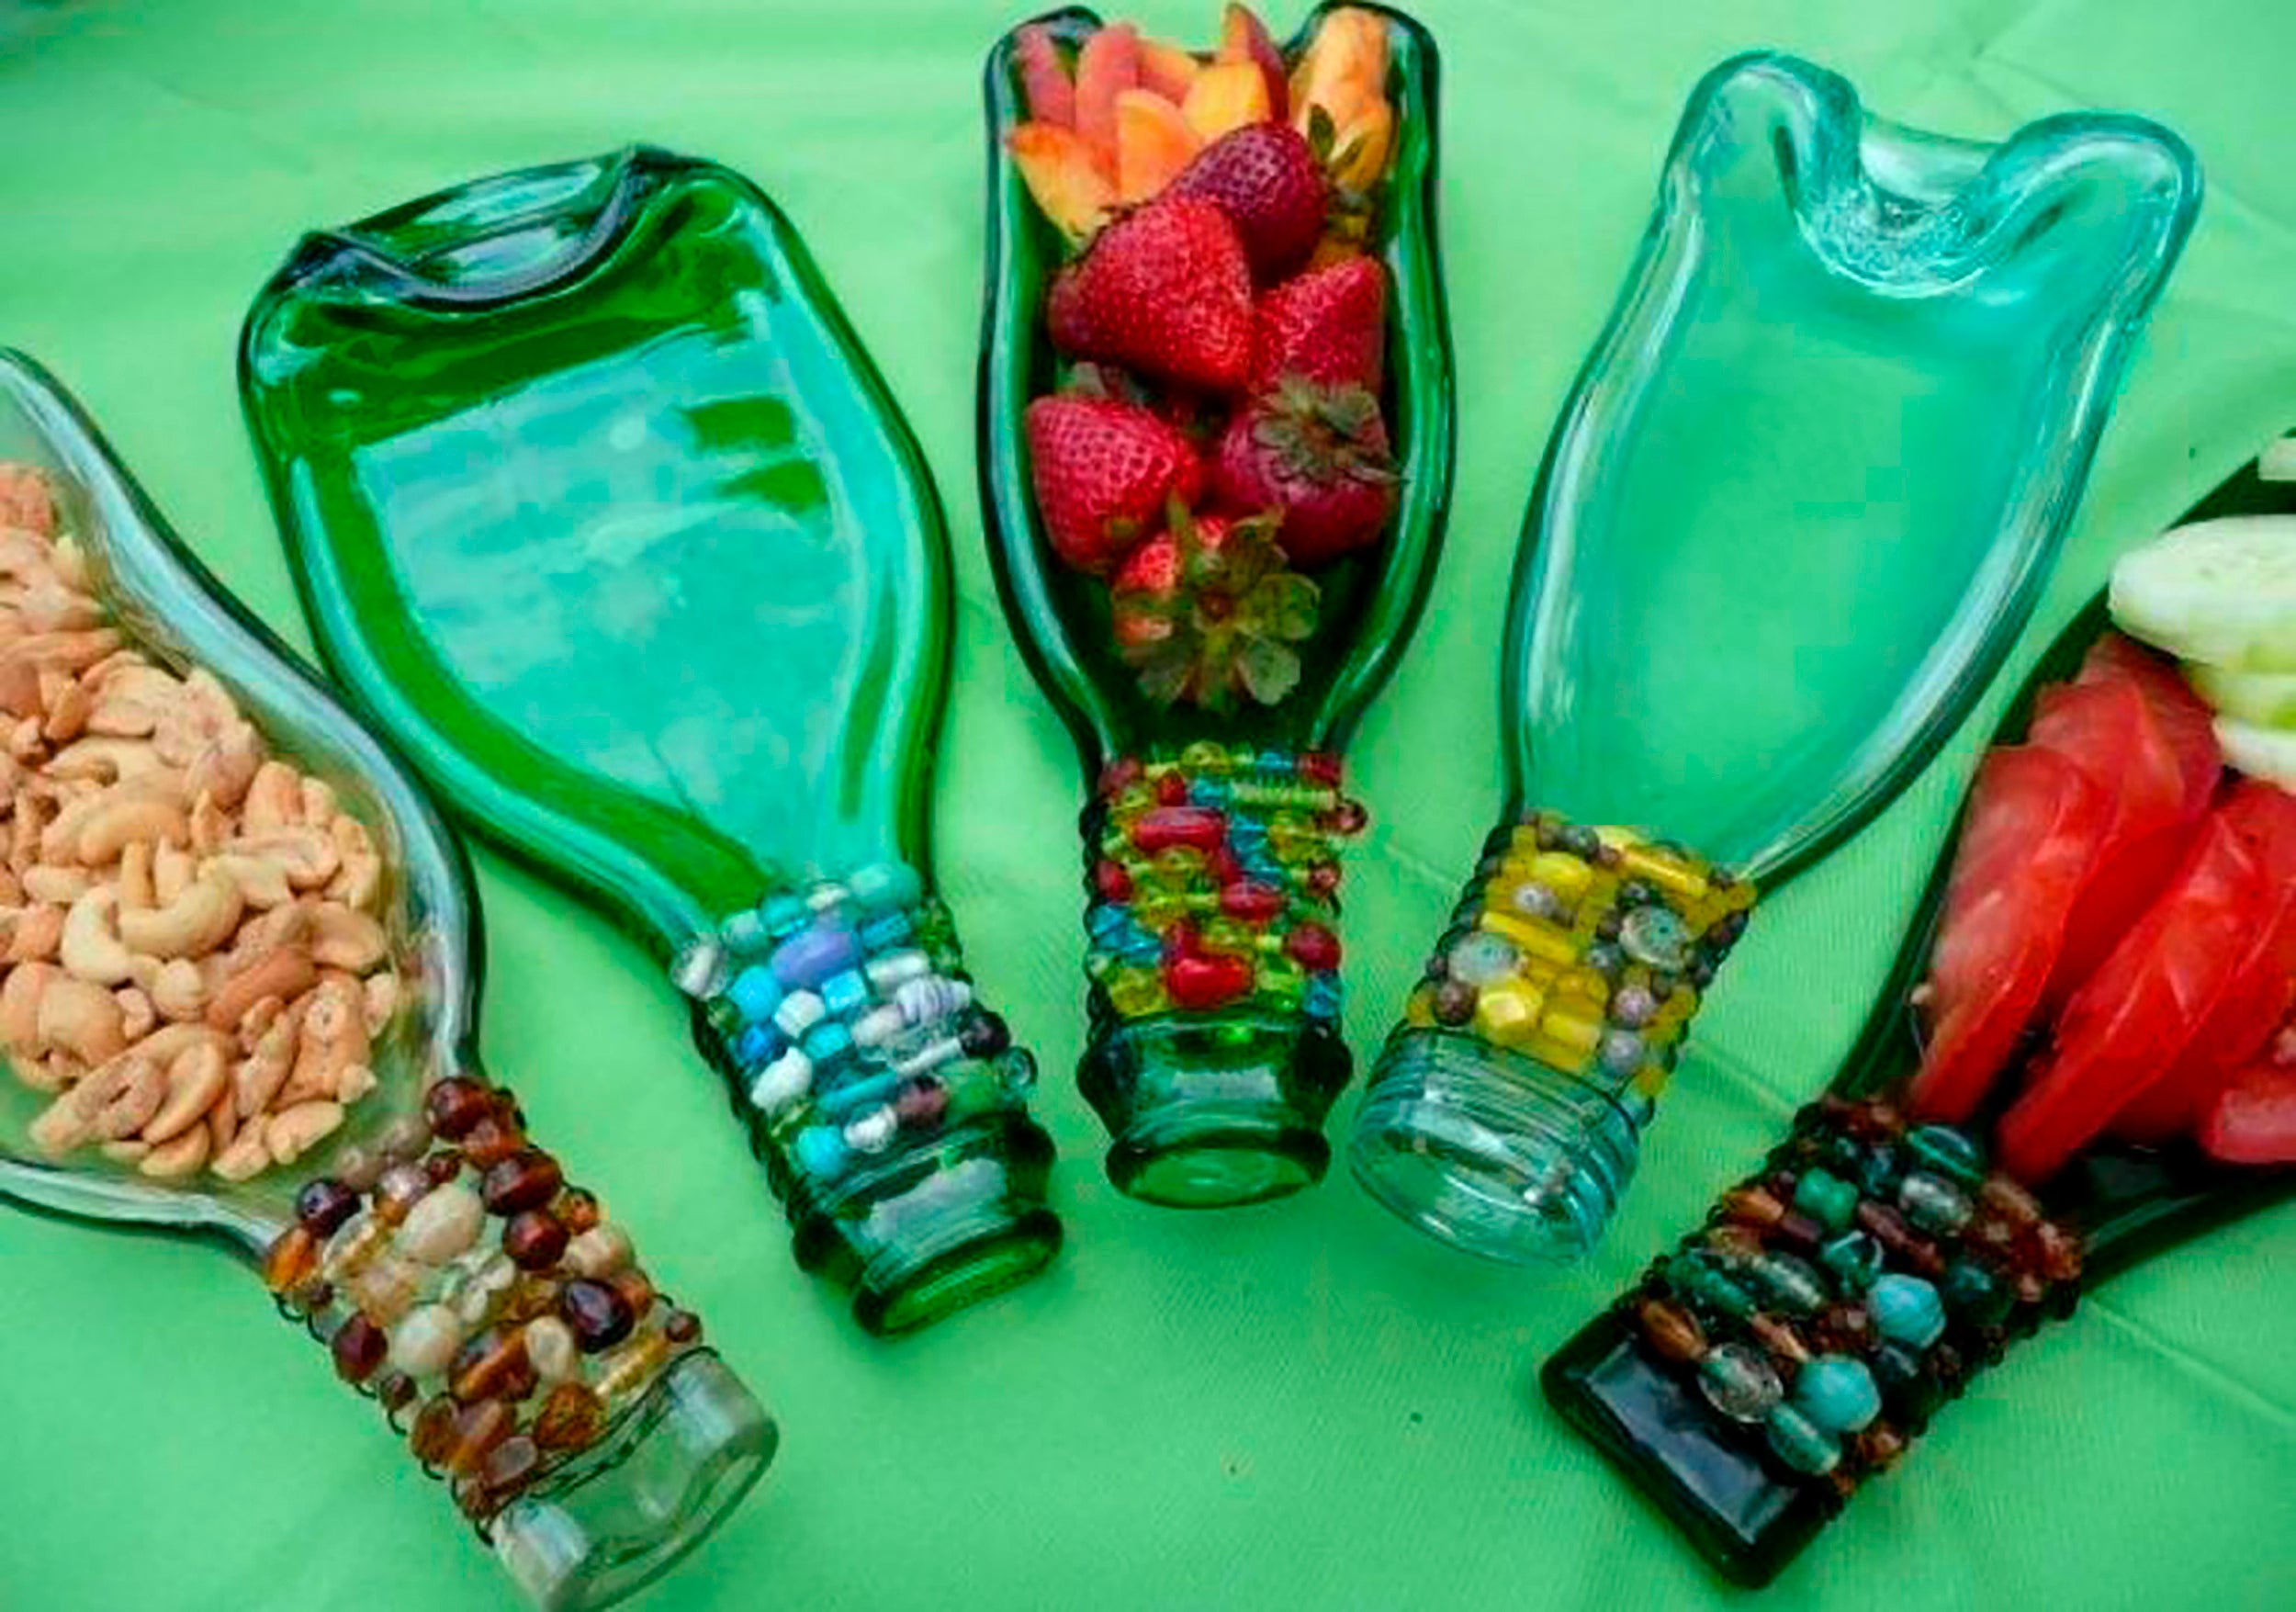 Recycled glass bottles.